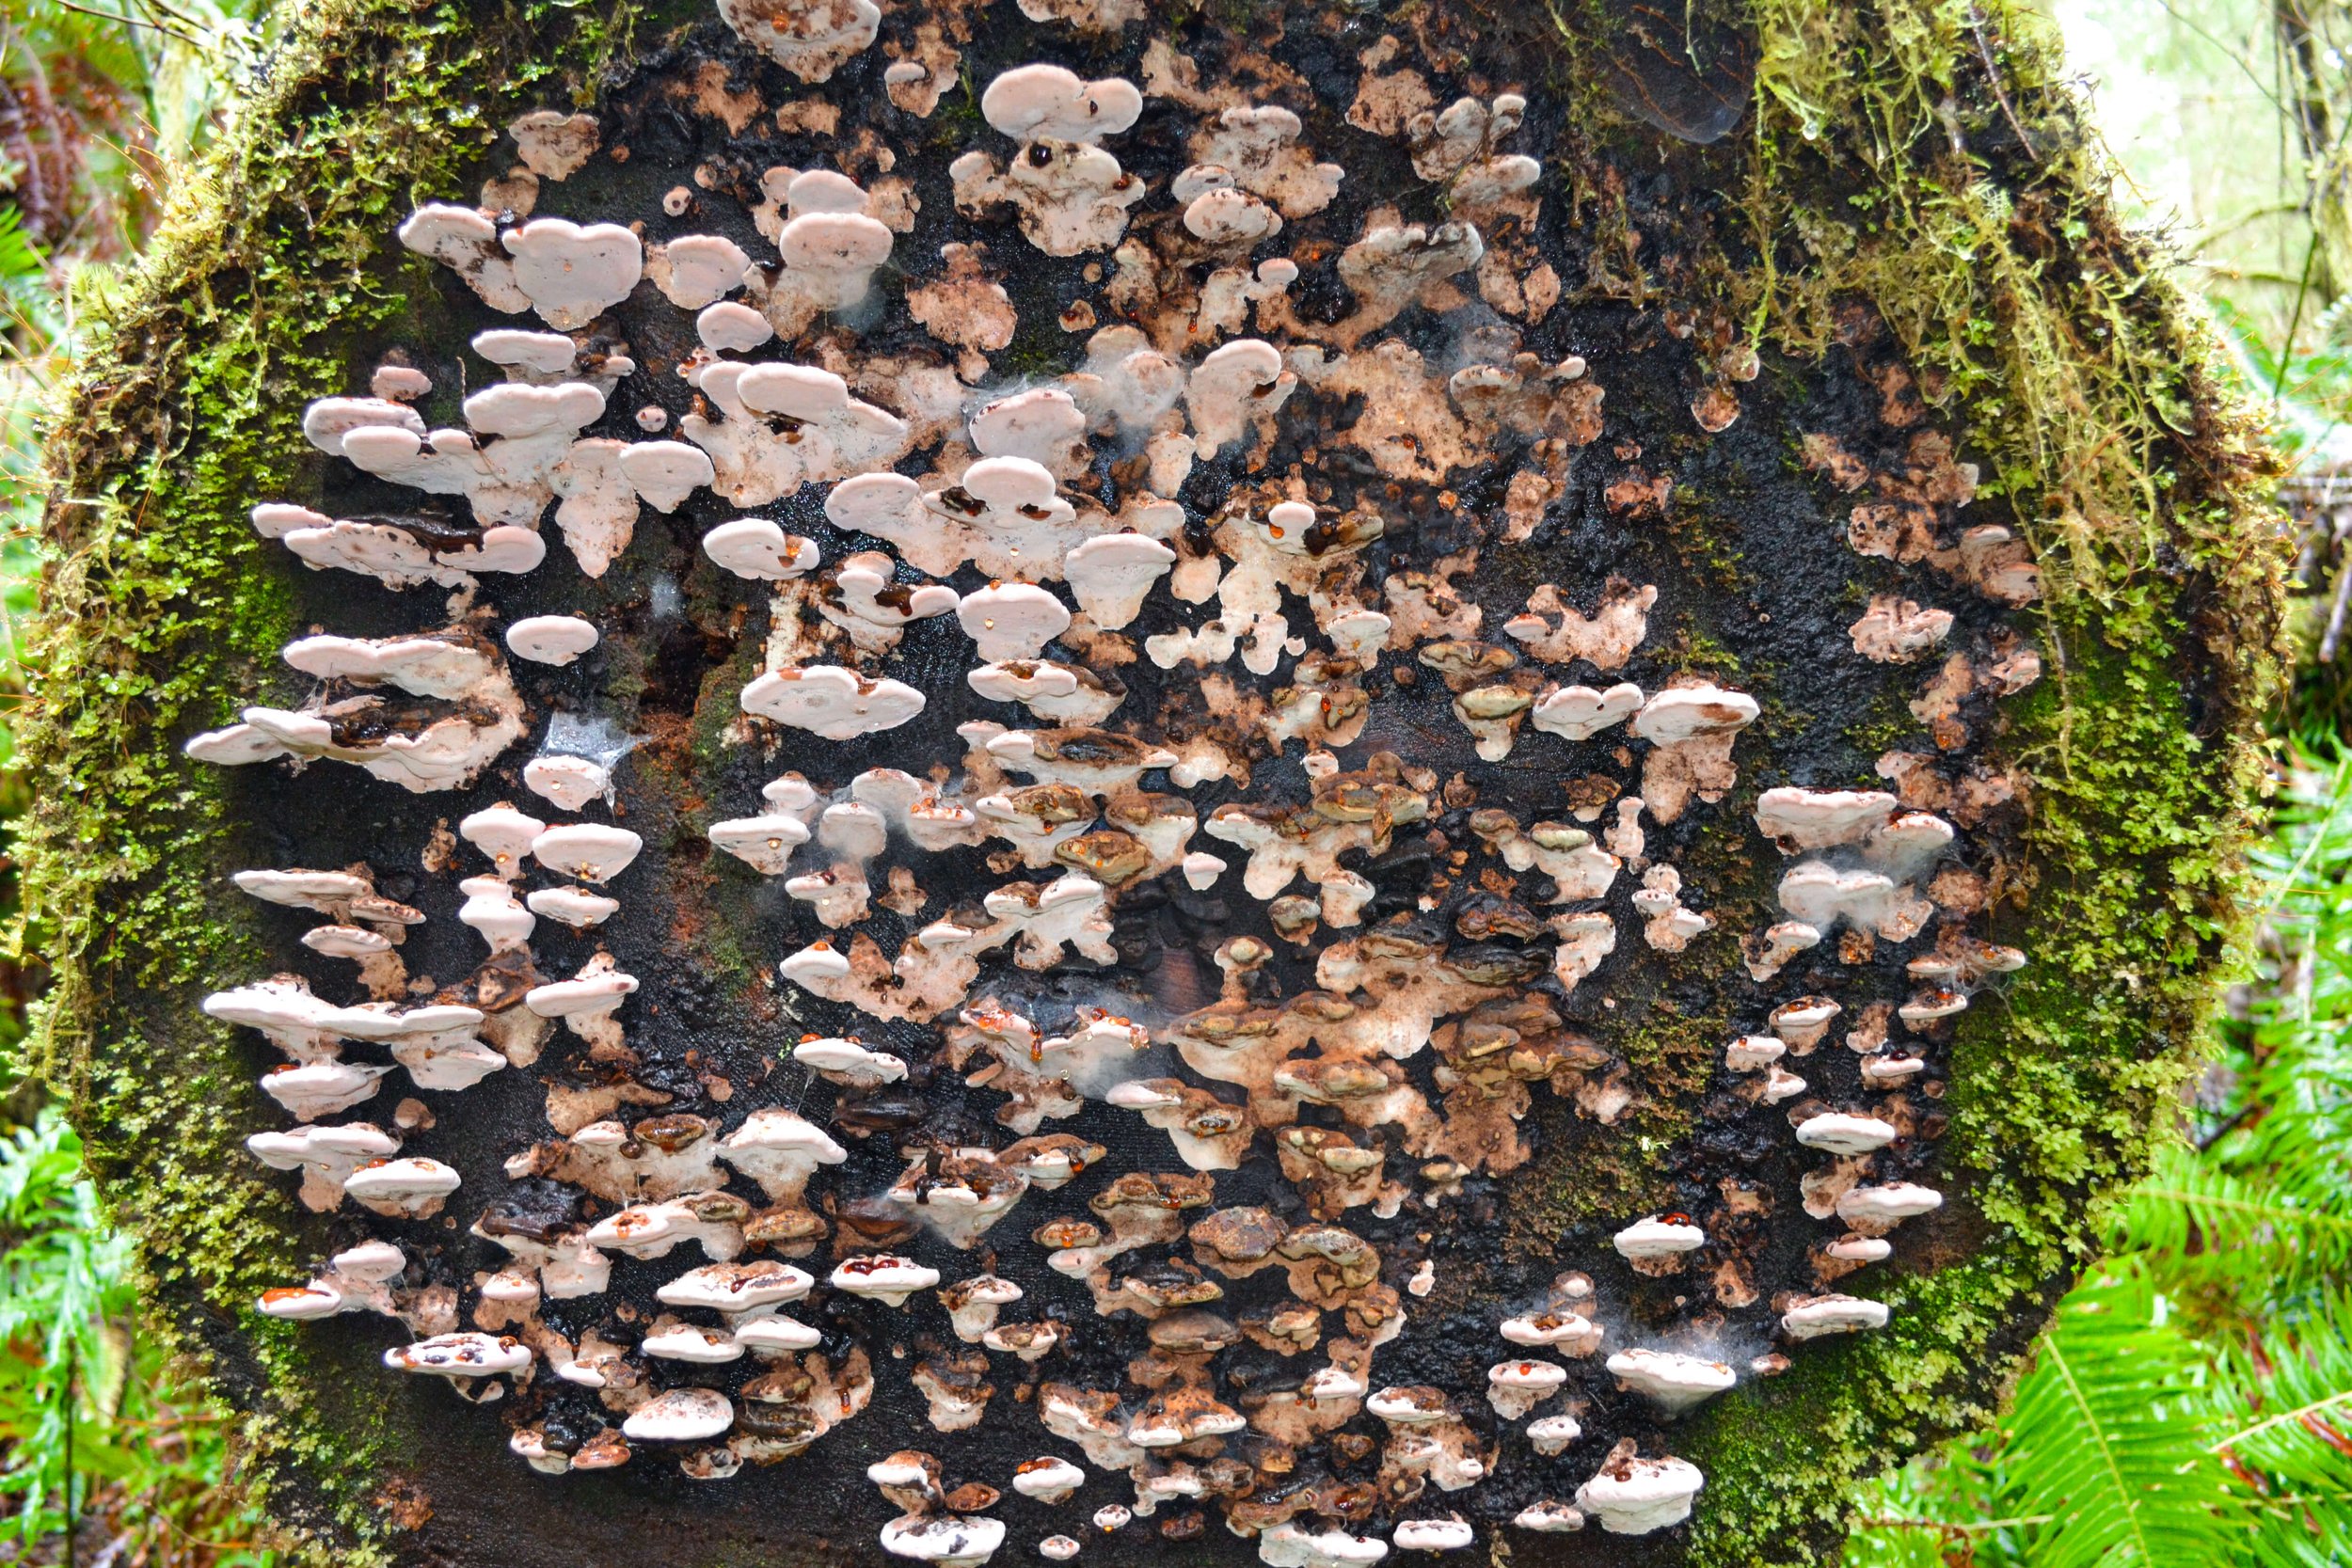 Mushrooms growing in Quinault Rainforest in Washington